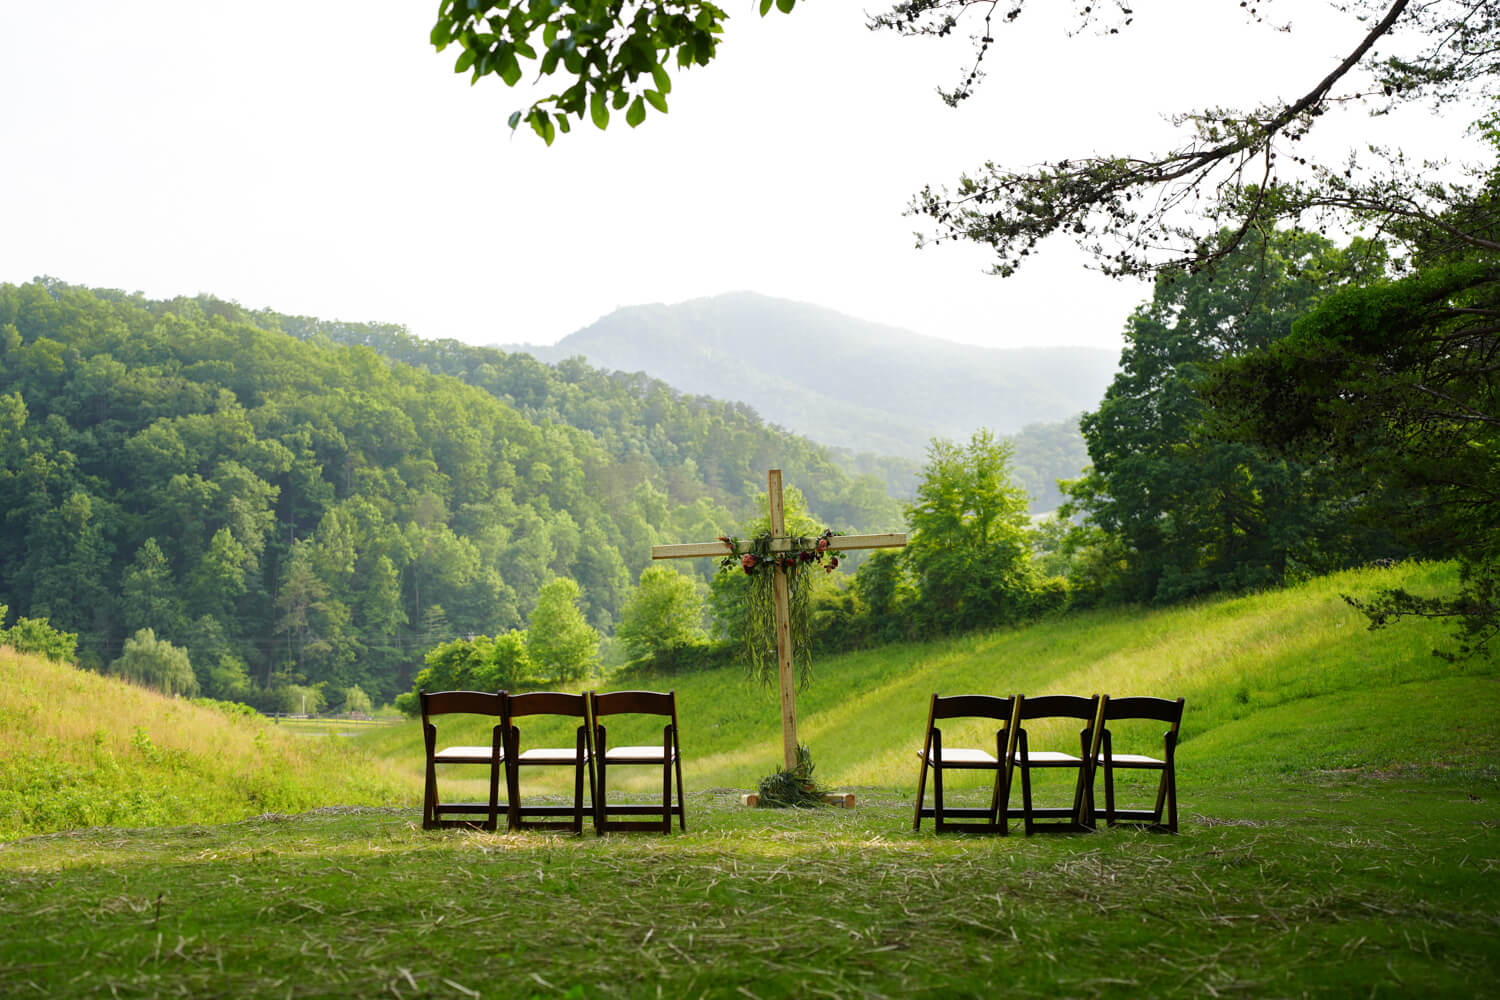 Wedding ceremony site in the Smoky Mountains with a meadow and mountain view along with dark wooden folding chairs and a tall cross decorated with vines and rust colored flowers